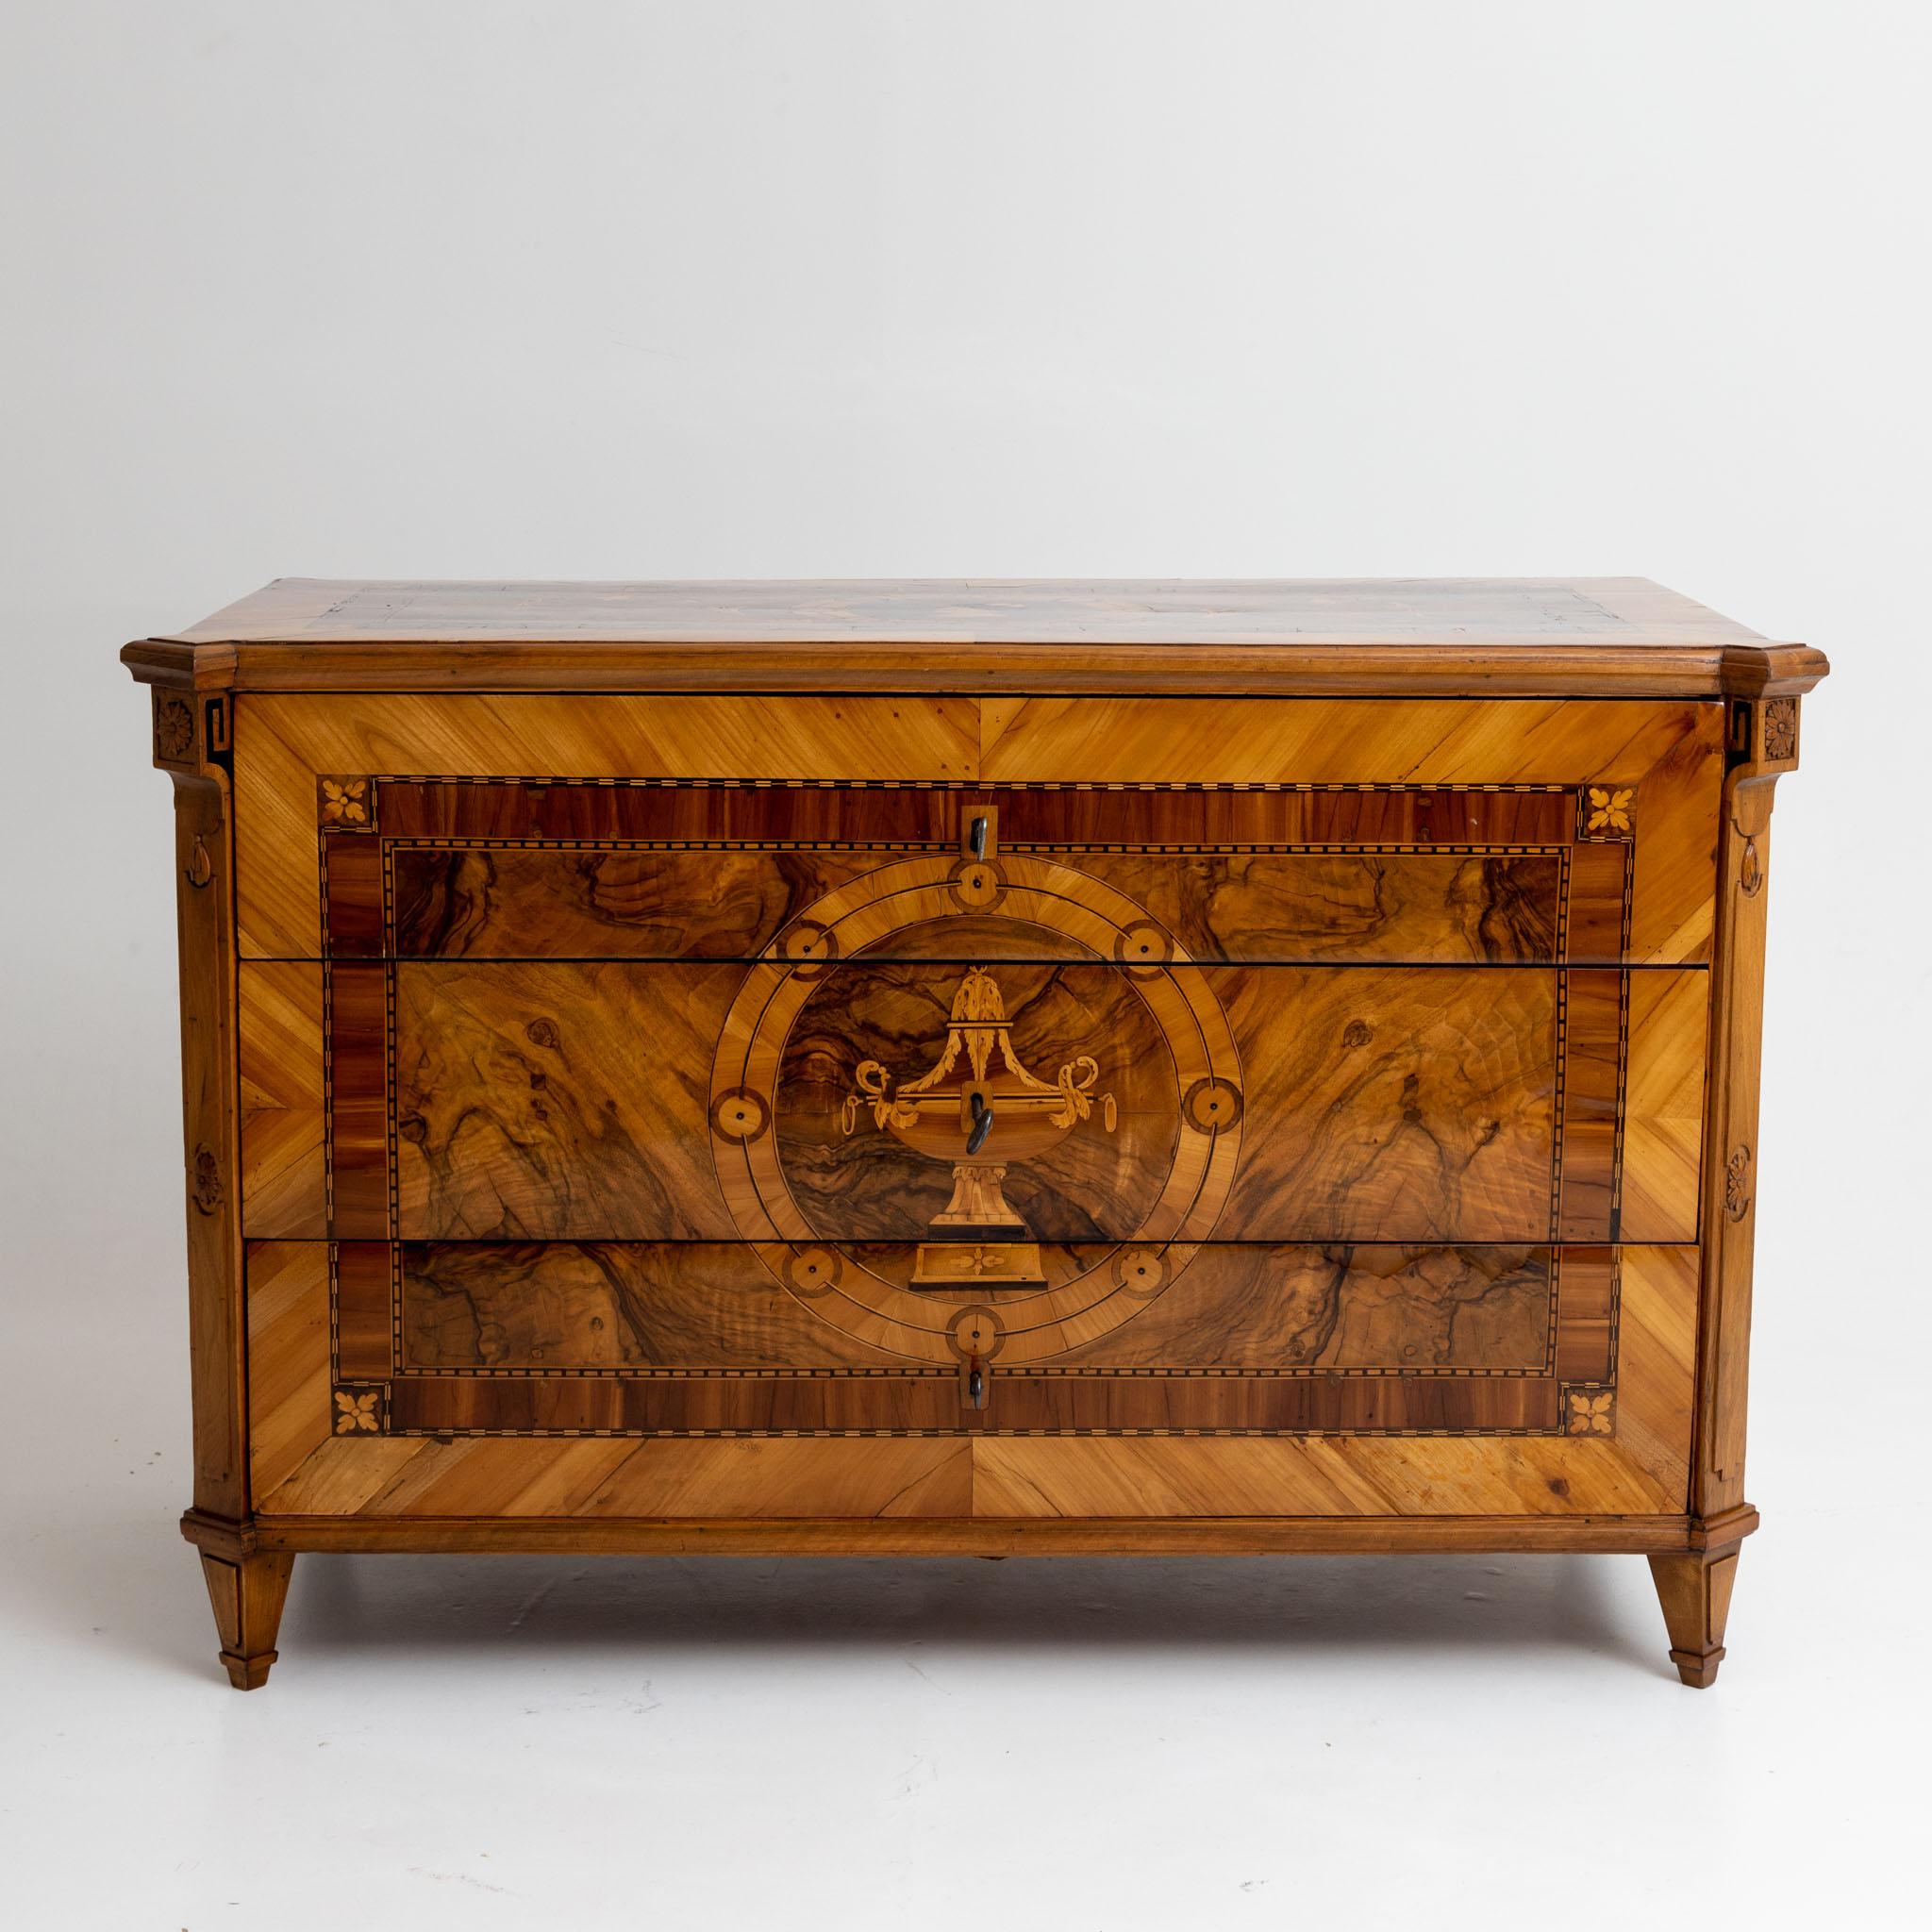 Large neoclassical chest of drawers on square-pointed feet, veneer and marquetry in cherry and walnut. The body is decorated with openwork volutes with rosette decoration on the beveled corners and shows framing inlays on all sides. On the front is